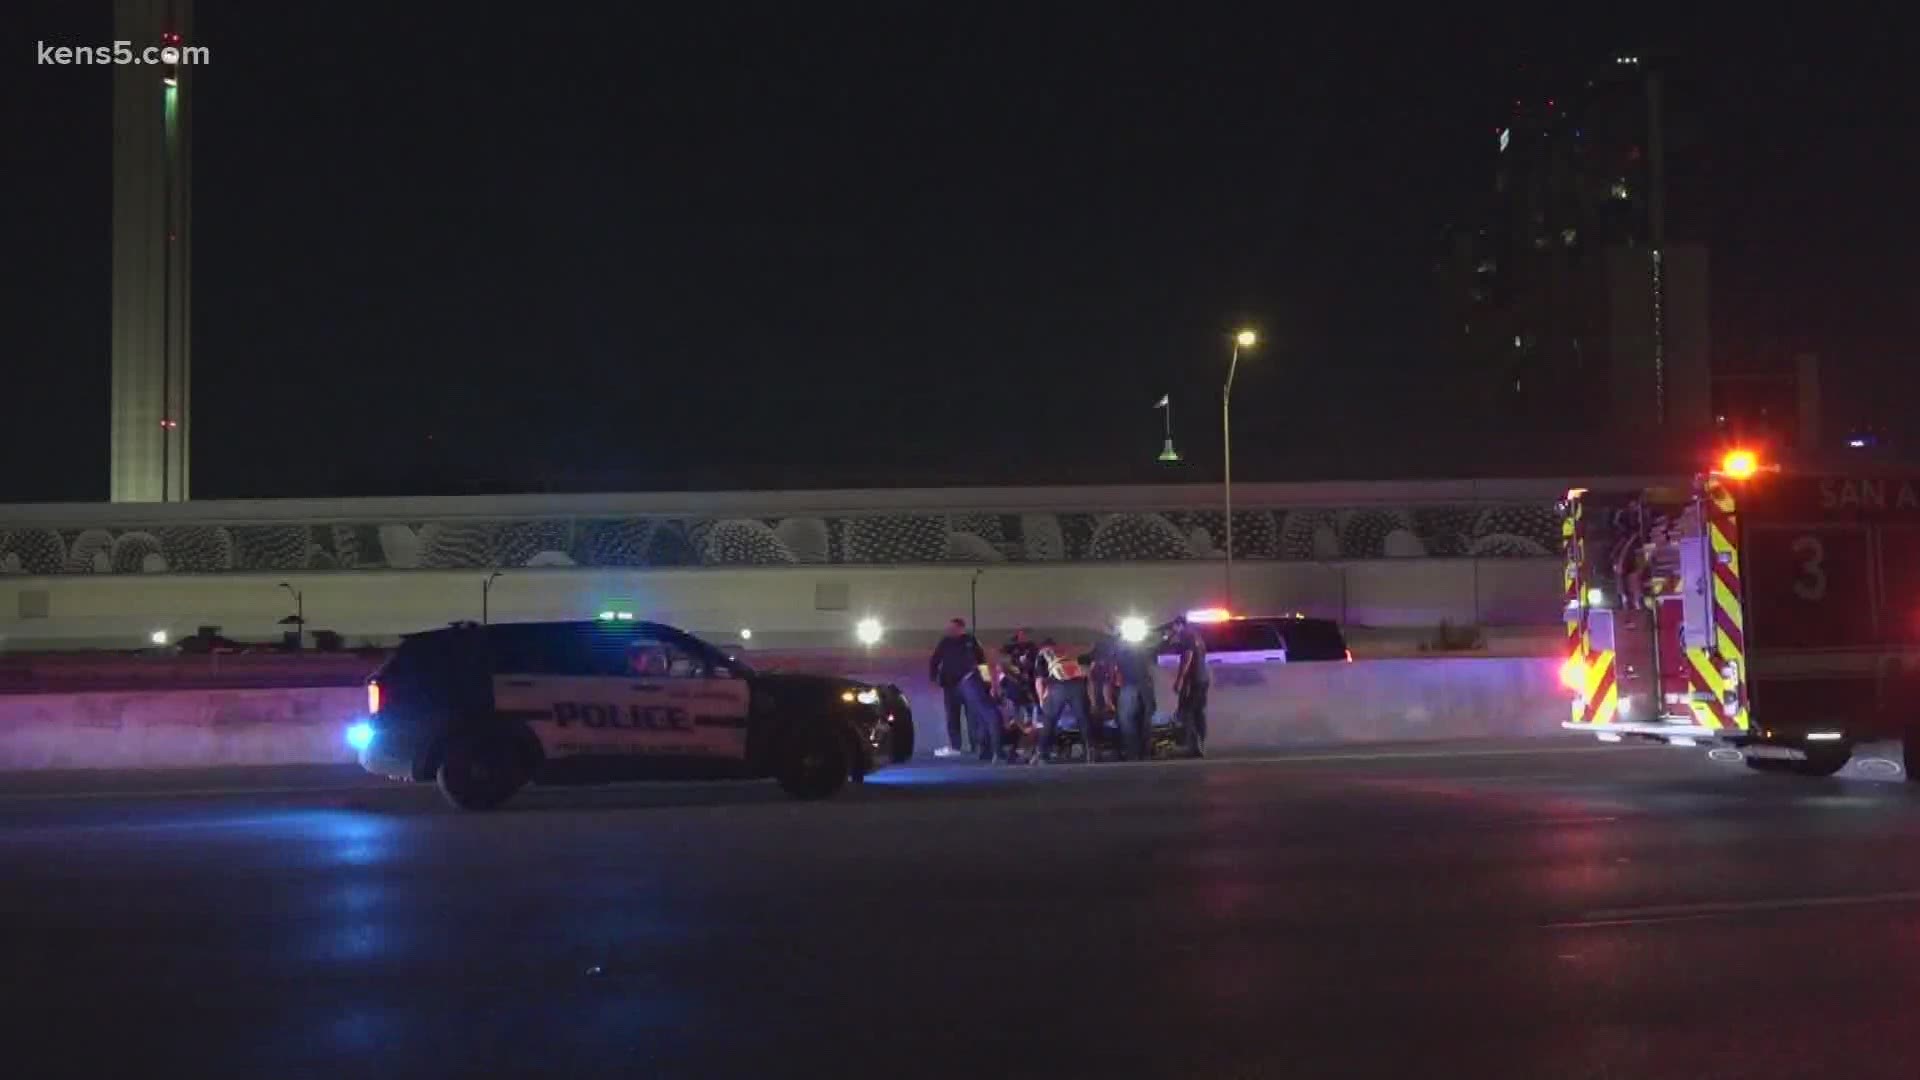 A woman is in critical condition after being hit by a pickup truck overnight along I-37 near downtown San Antonio.